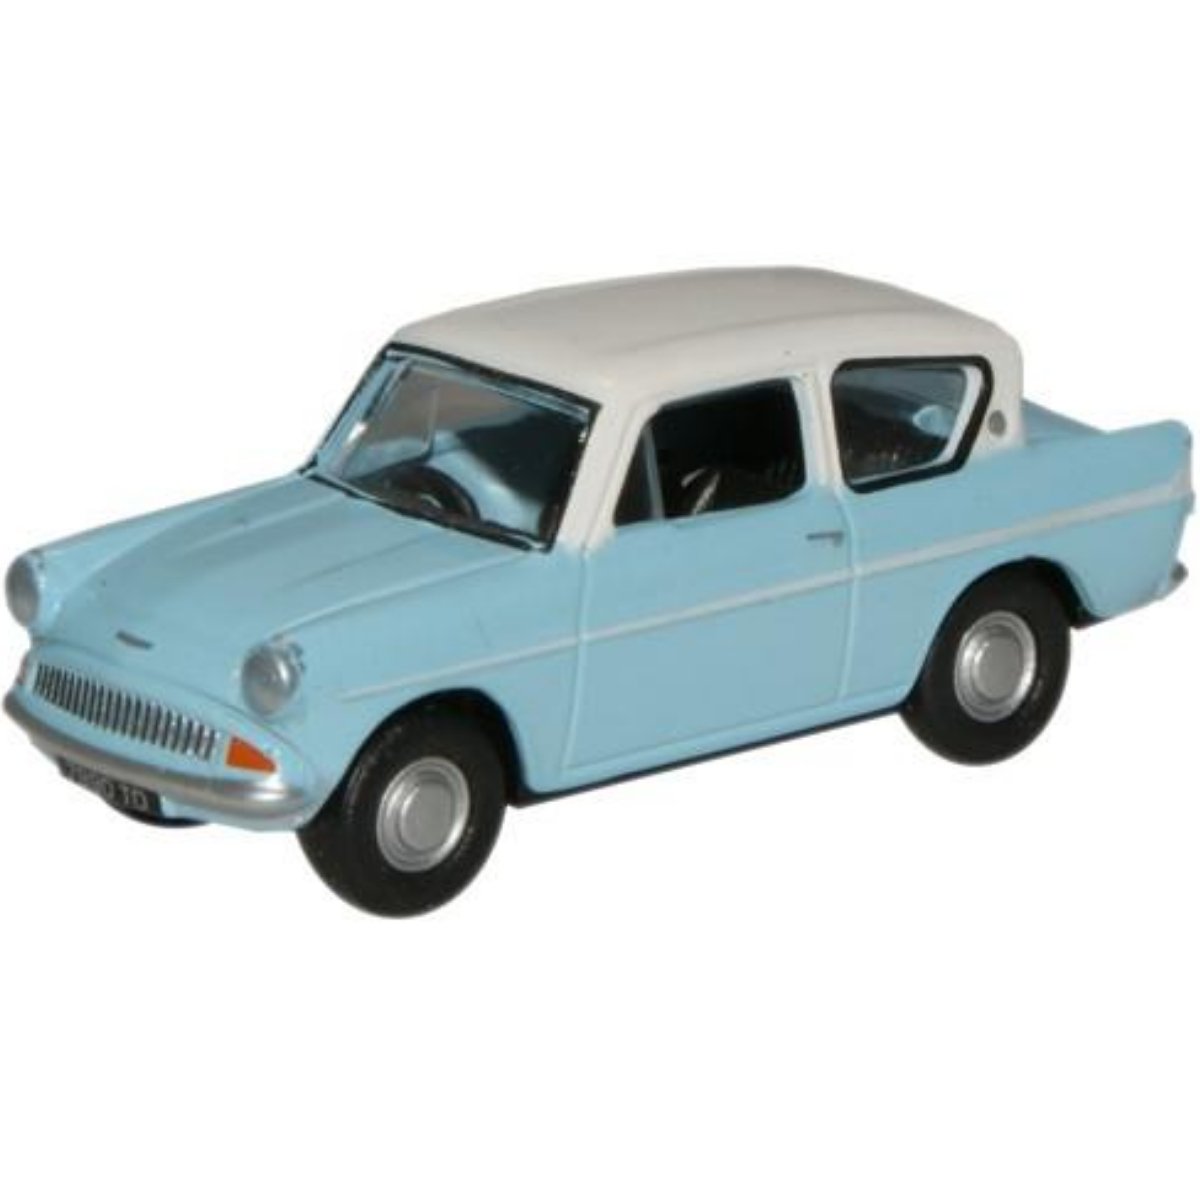 Oxford Diecast 76105007 Light Blue & Ermine White Ford Anglia - Phillips Hobbies